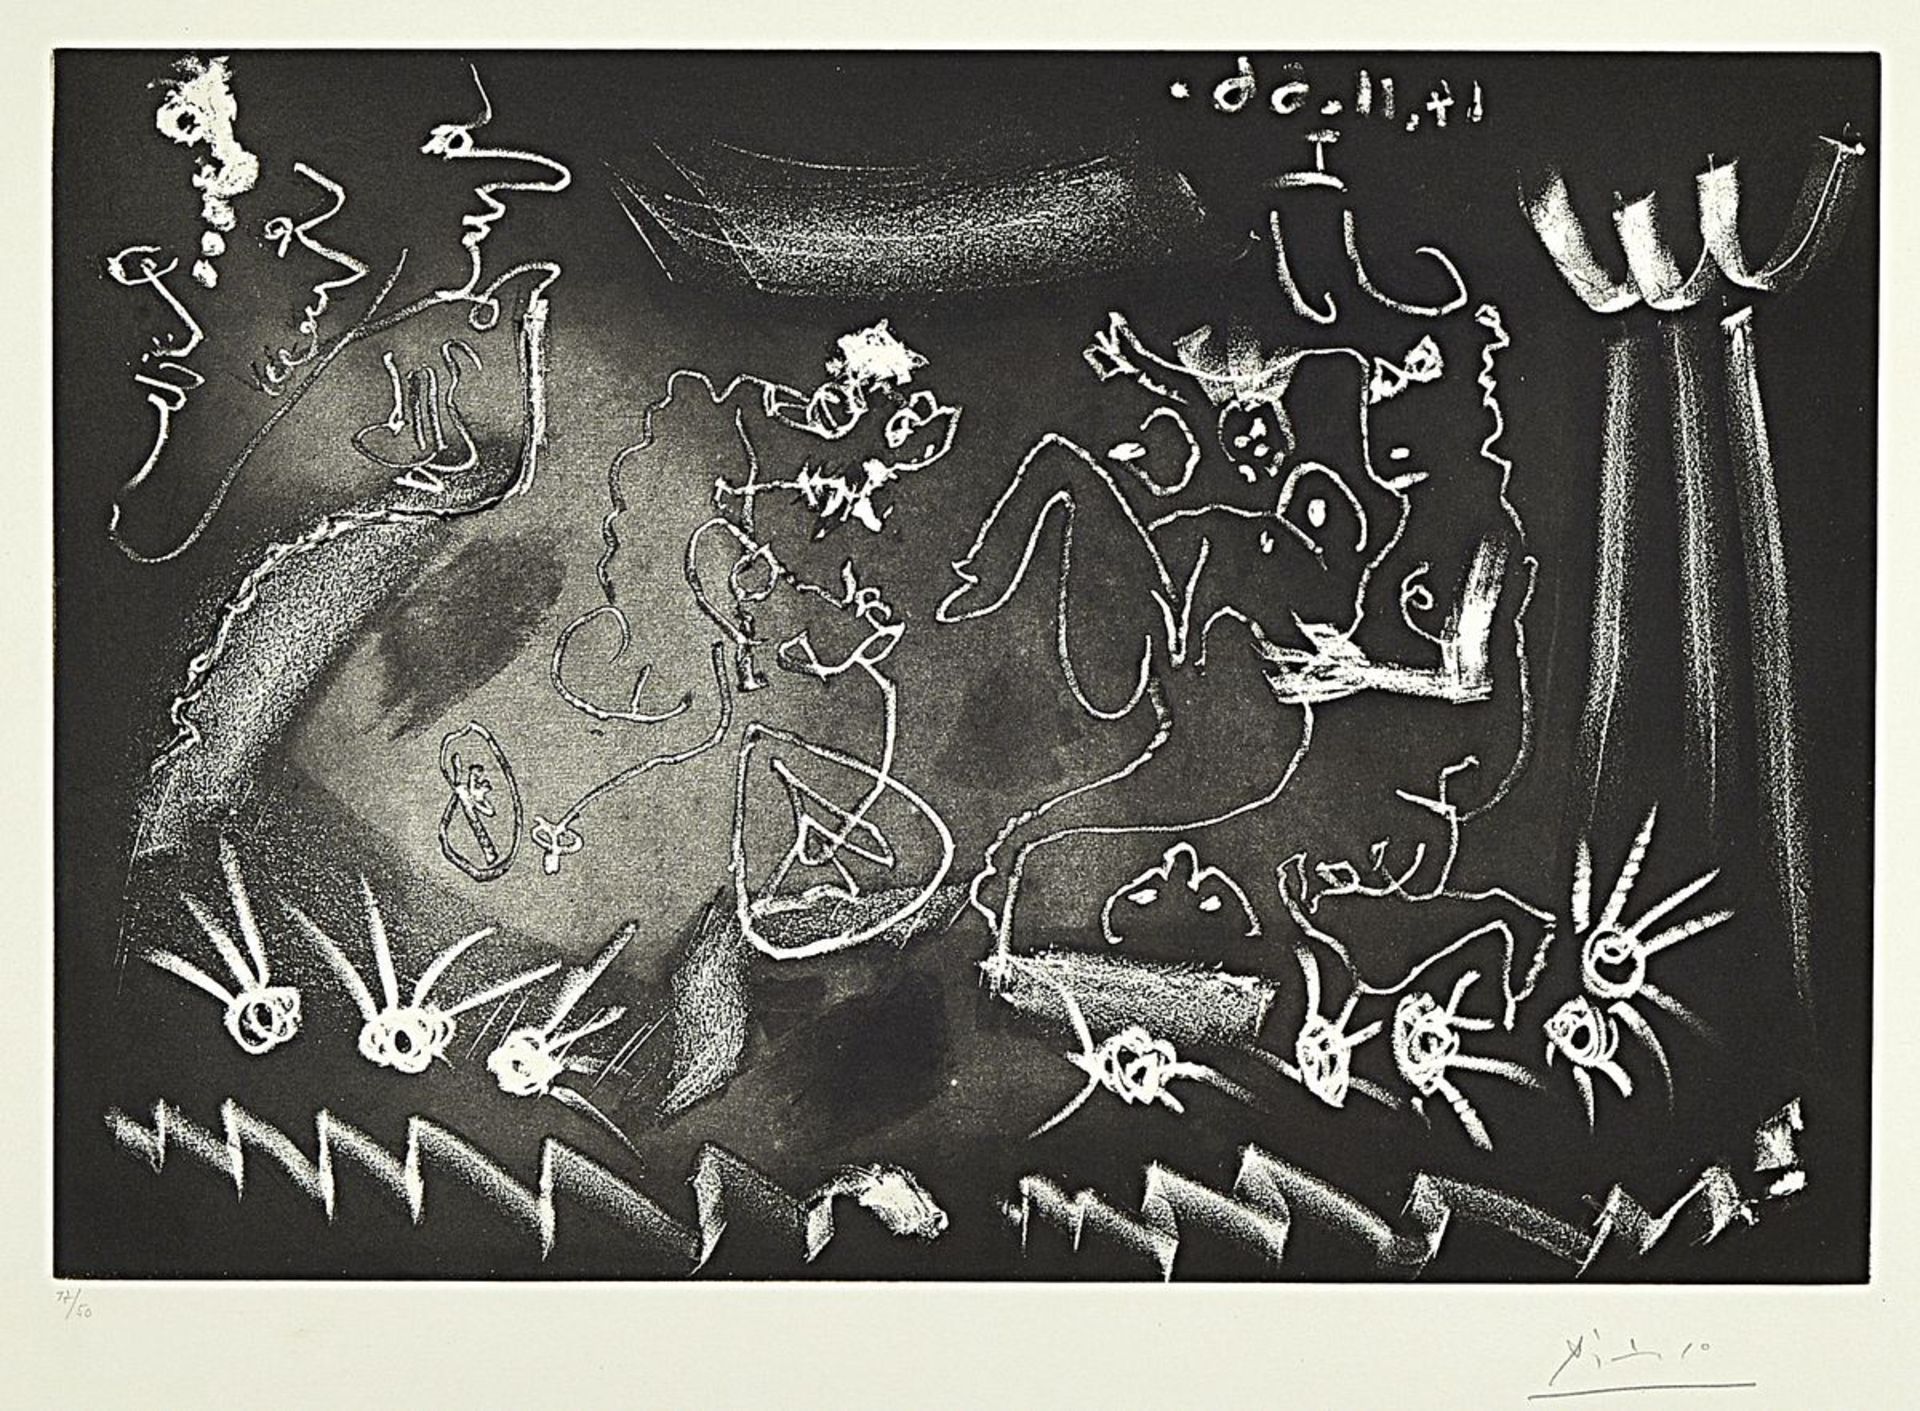 Pablo Picasso, 1881 - 1973, aquatint and drypoint etching on BFK Rives paper with watermark,